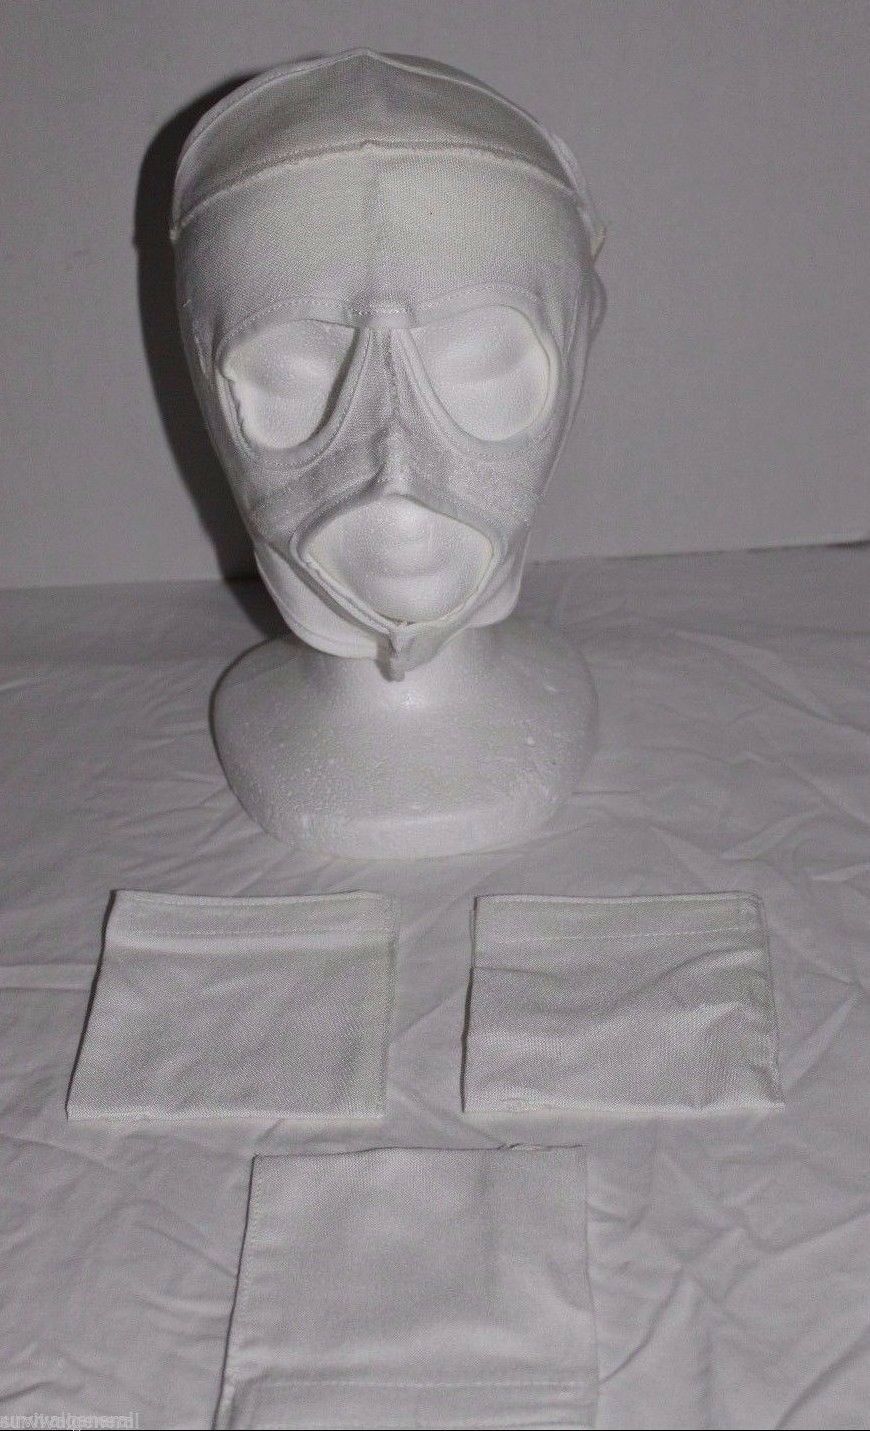 Army British Military Surplus MK2 Flame Resistant Extreme Cold Weather Face Mask